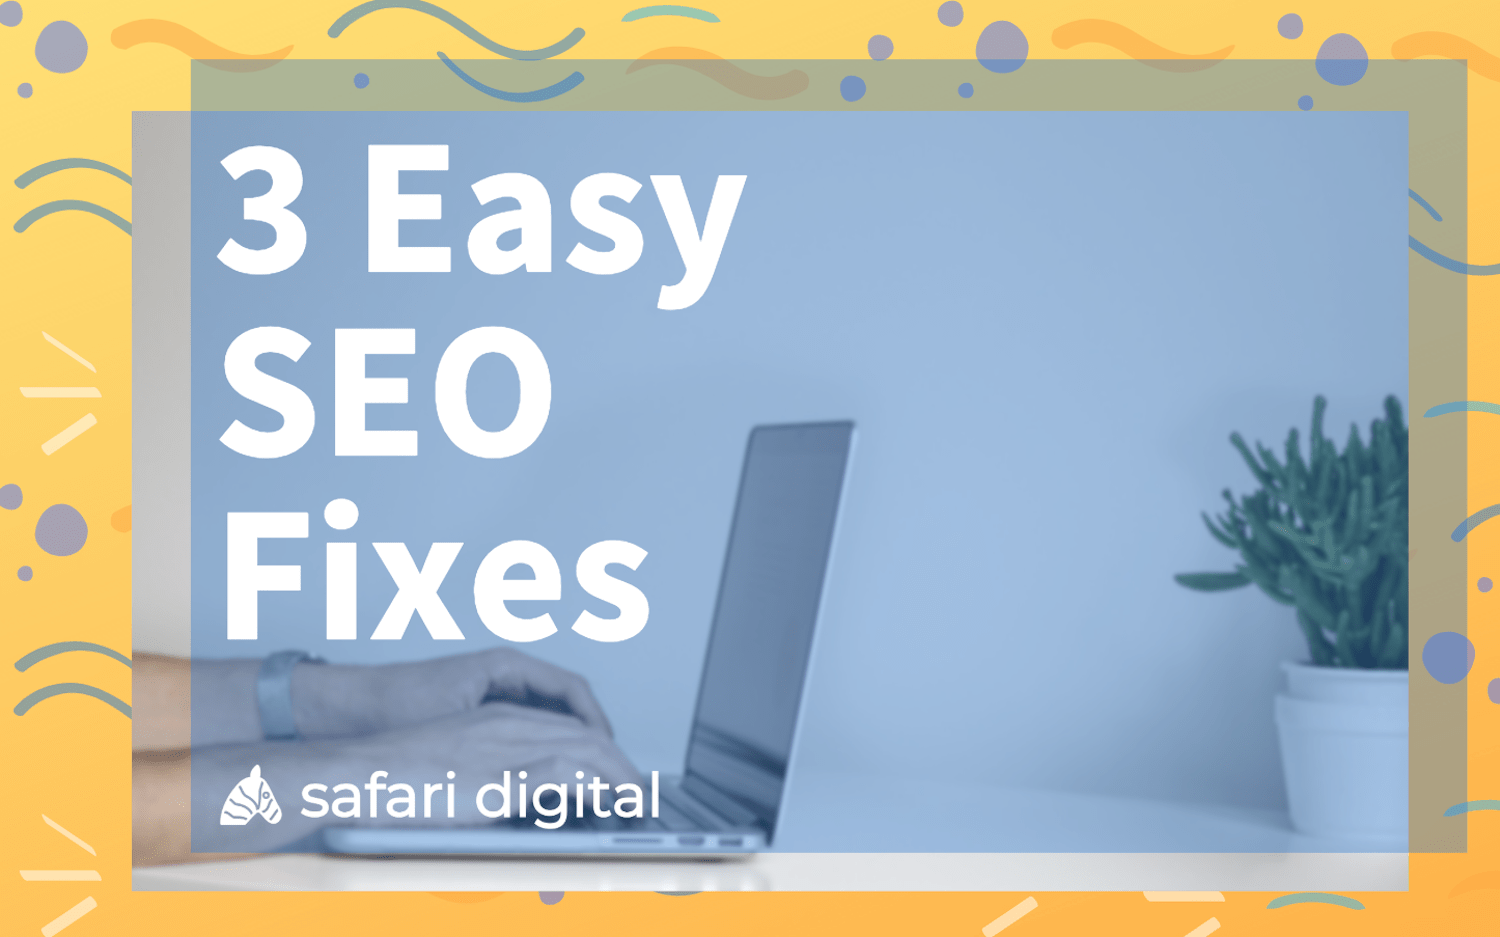 3 easy SEO fixes banner image large